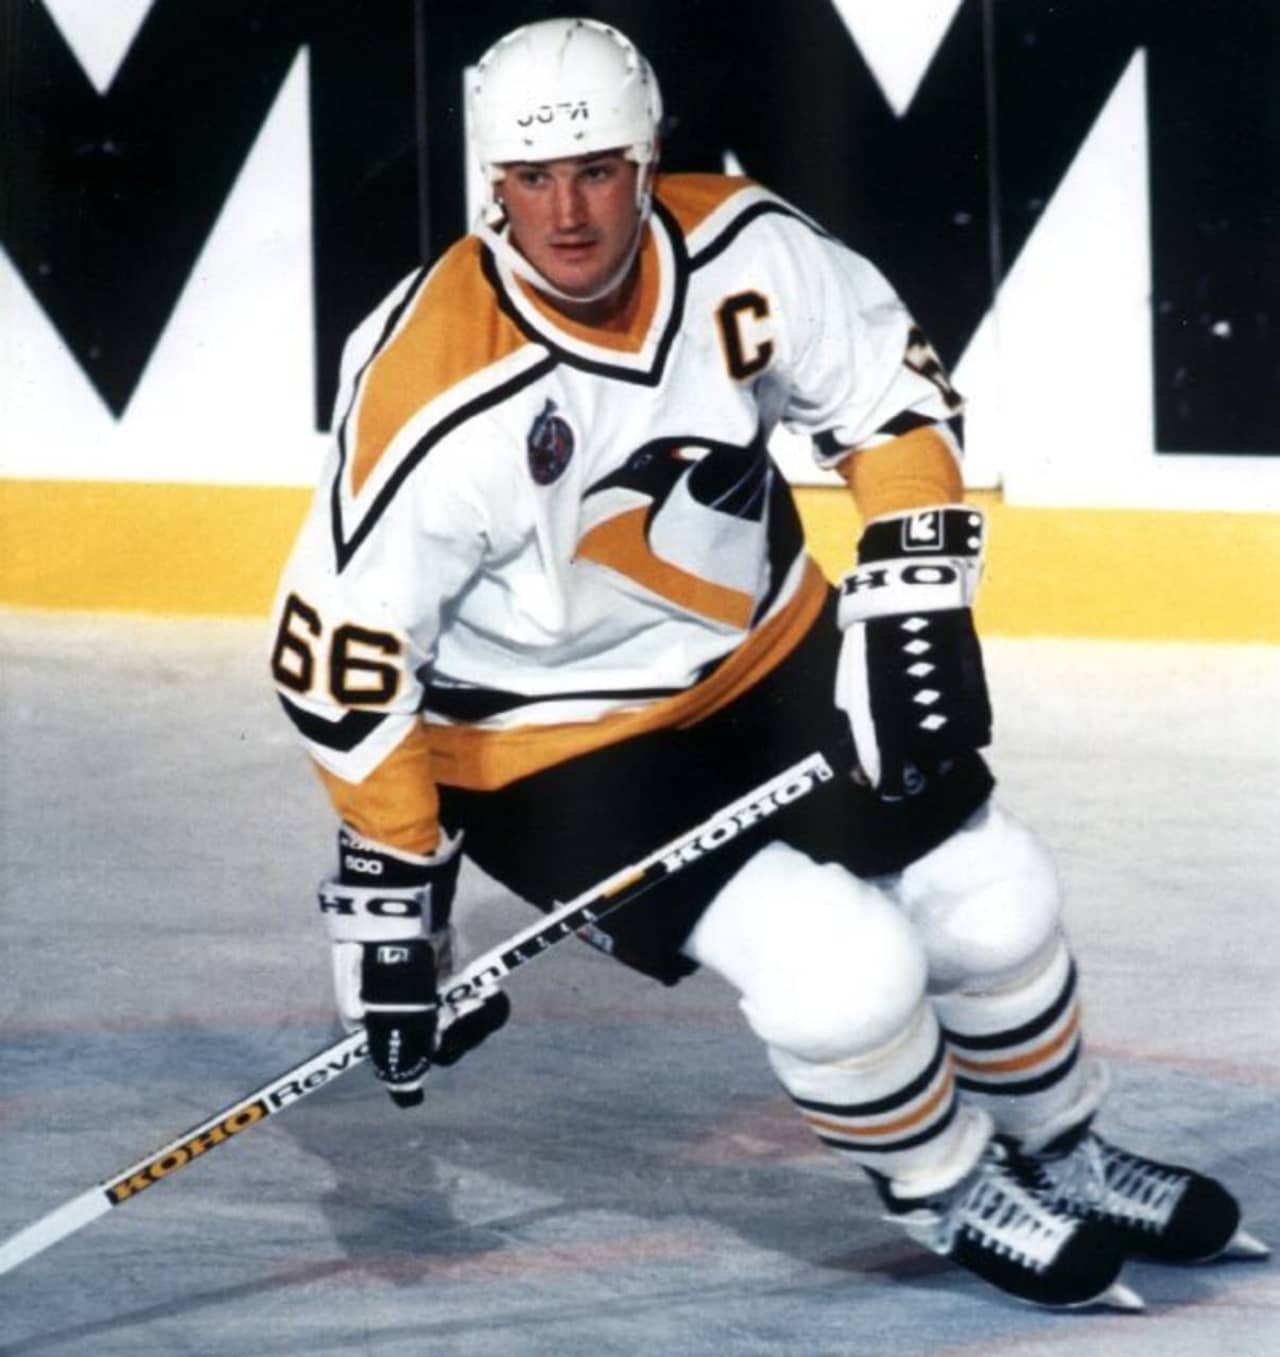 Mario Lemieux in 1992, who is a former play and current minority owner of the Pittsburgh Penguins.